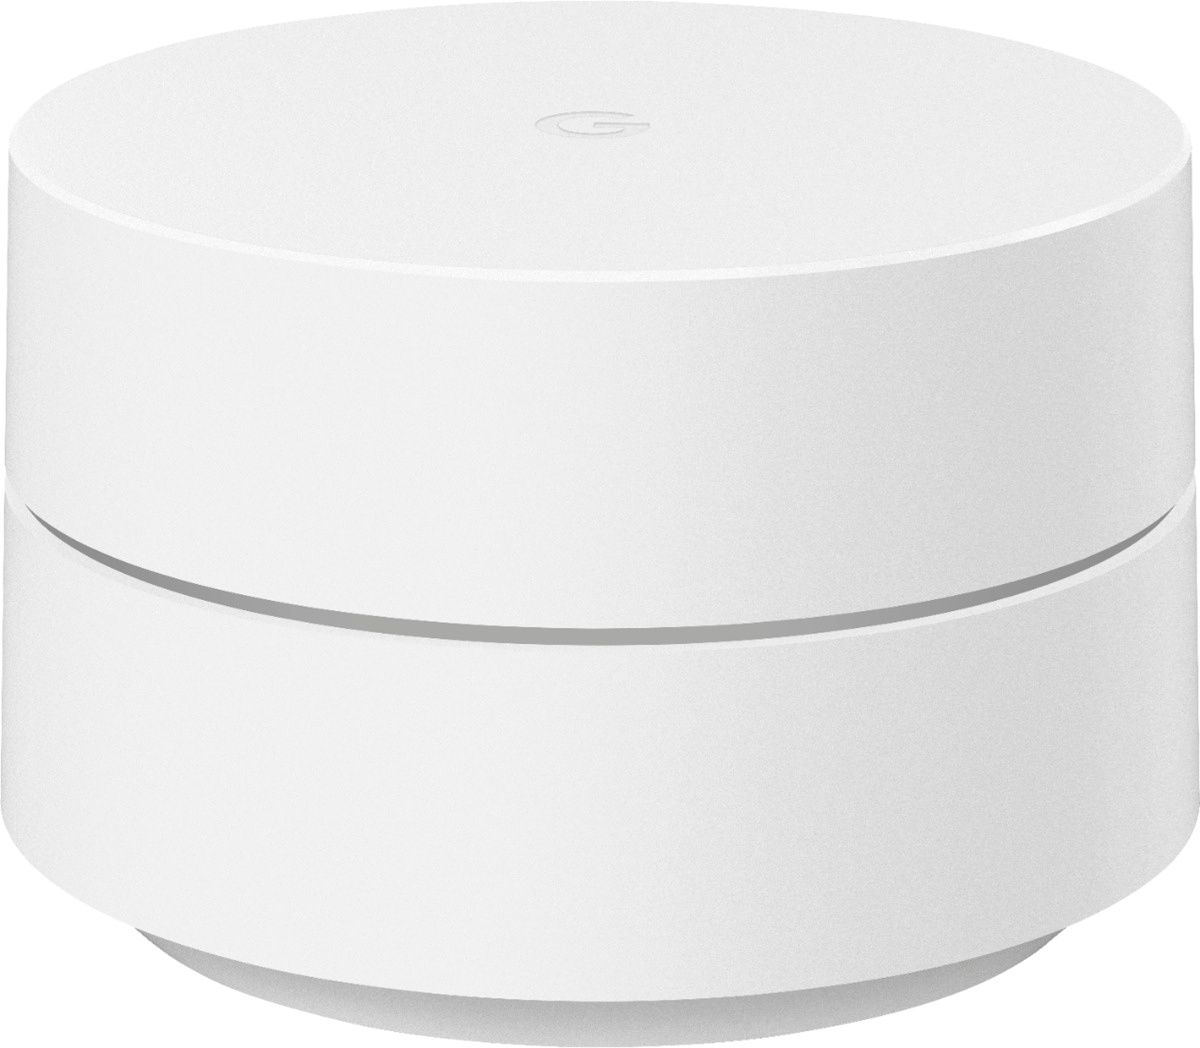 This is the latest version of the Google Wifi, a mesh WiFi router that brings fast internet to every corner of your (under 4,500 sq. ft.) home.